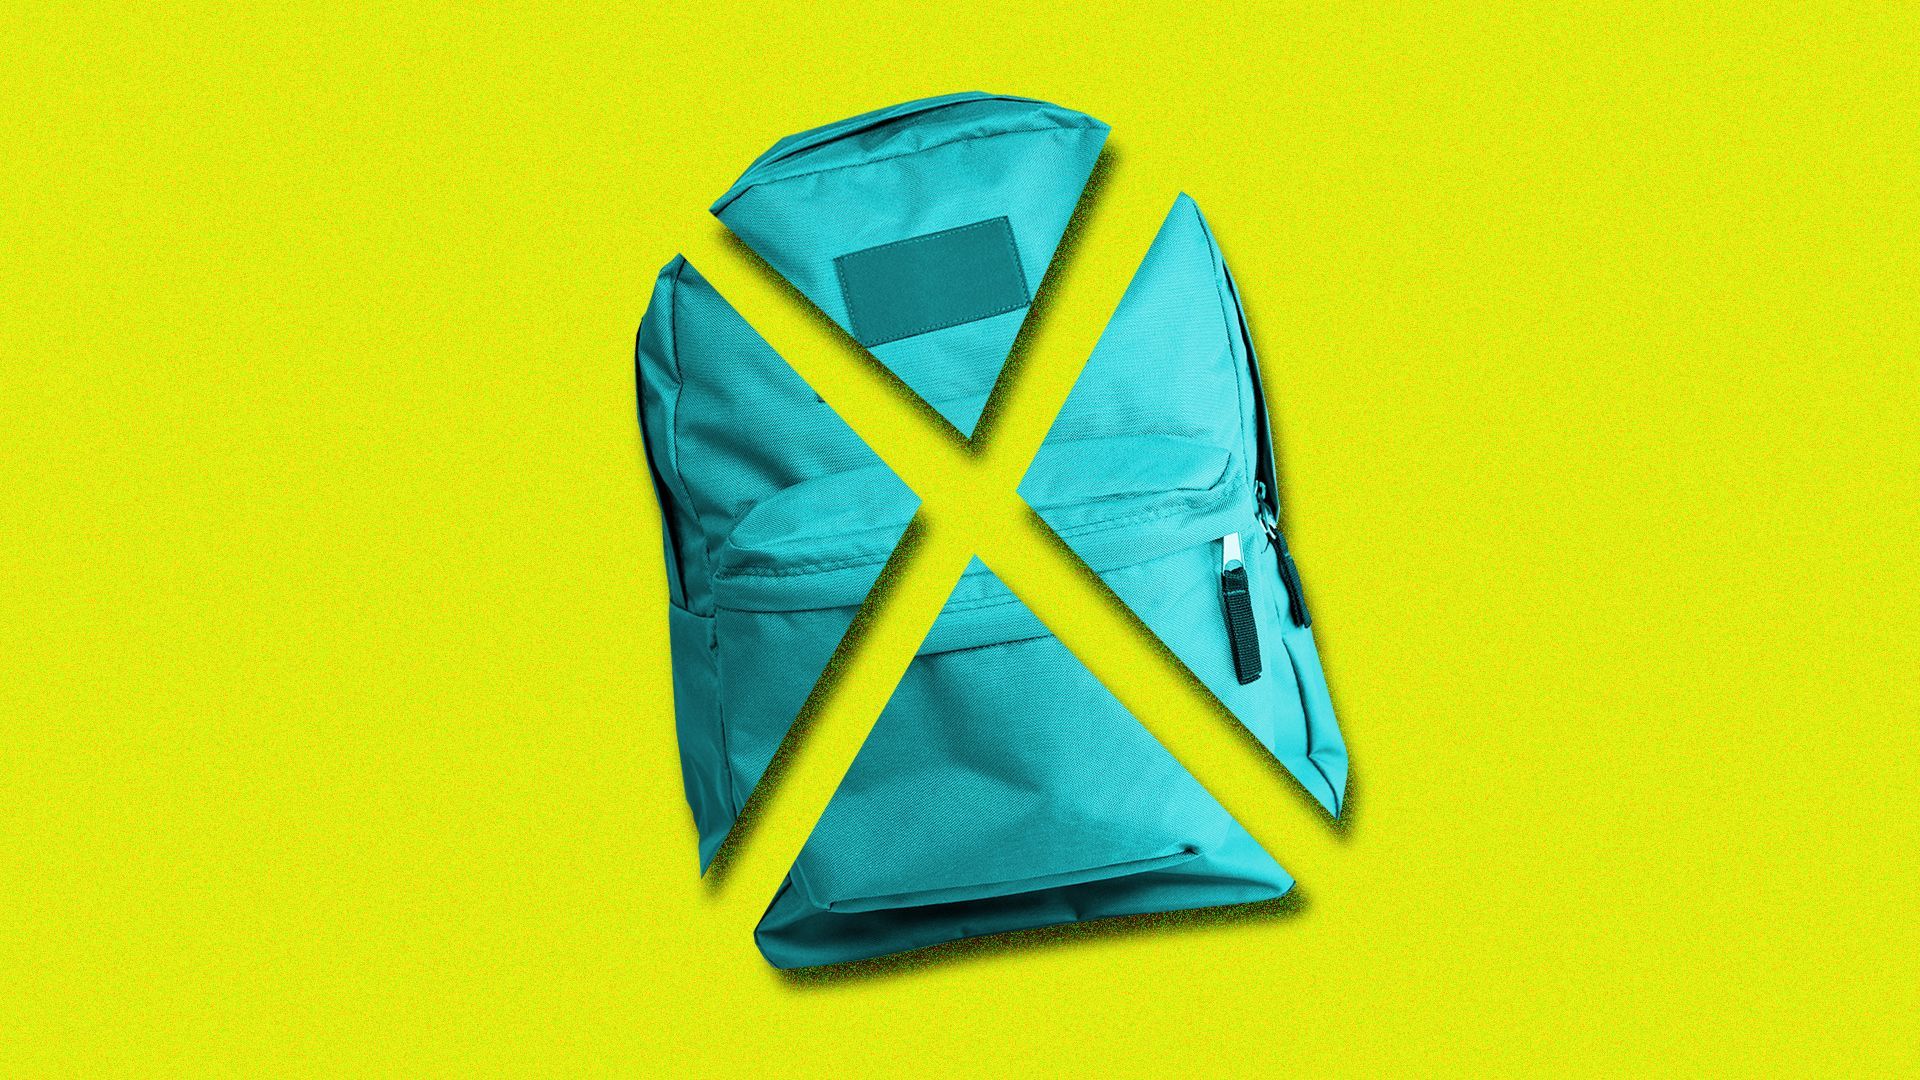 Illustration of a backpack broken into four pieces, forming an "x" shape.